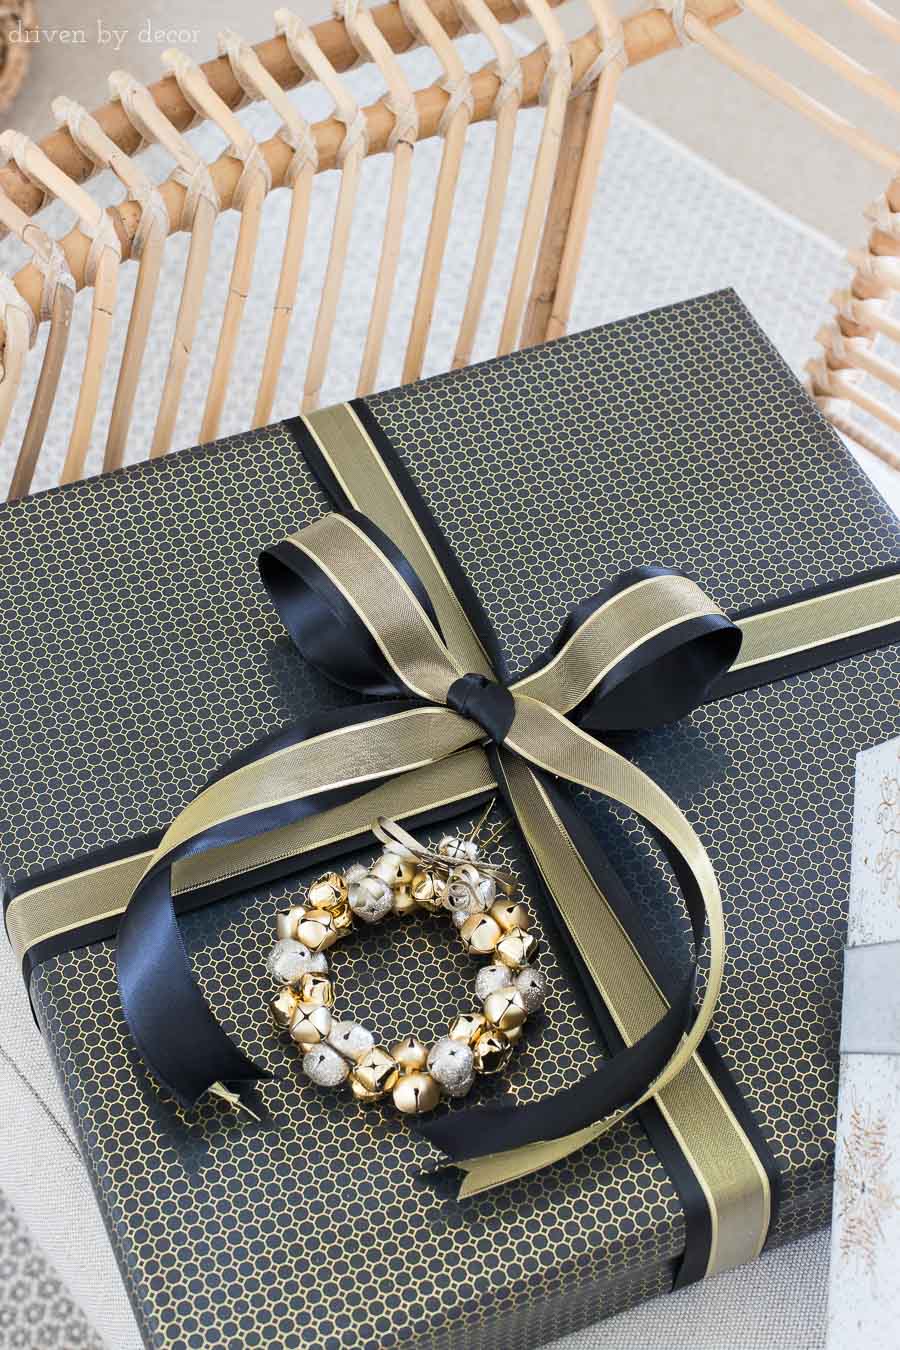 How to Wrap Christmas Presents 10 Ideas To Take Your Presents to the